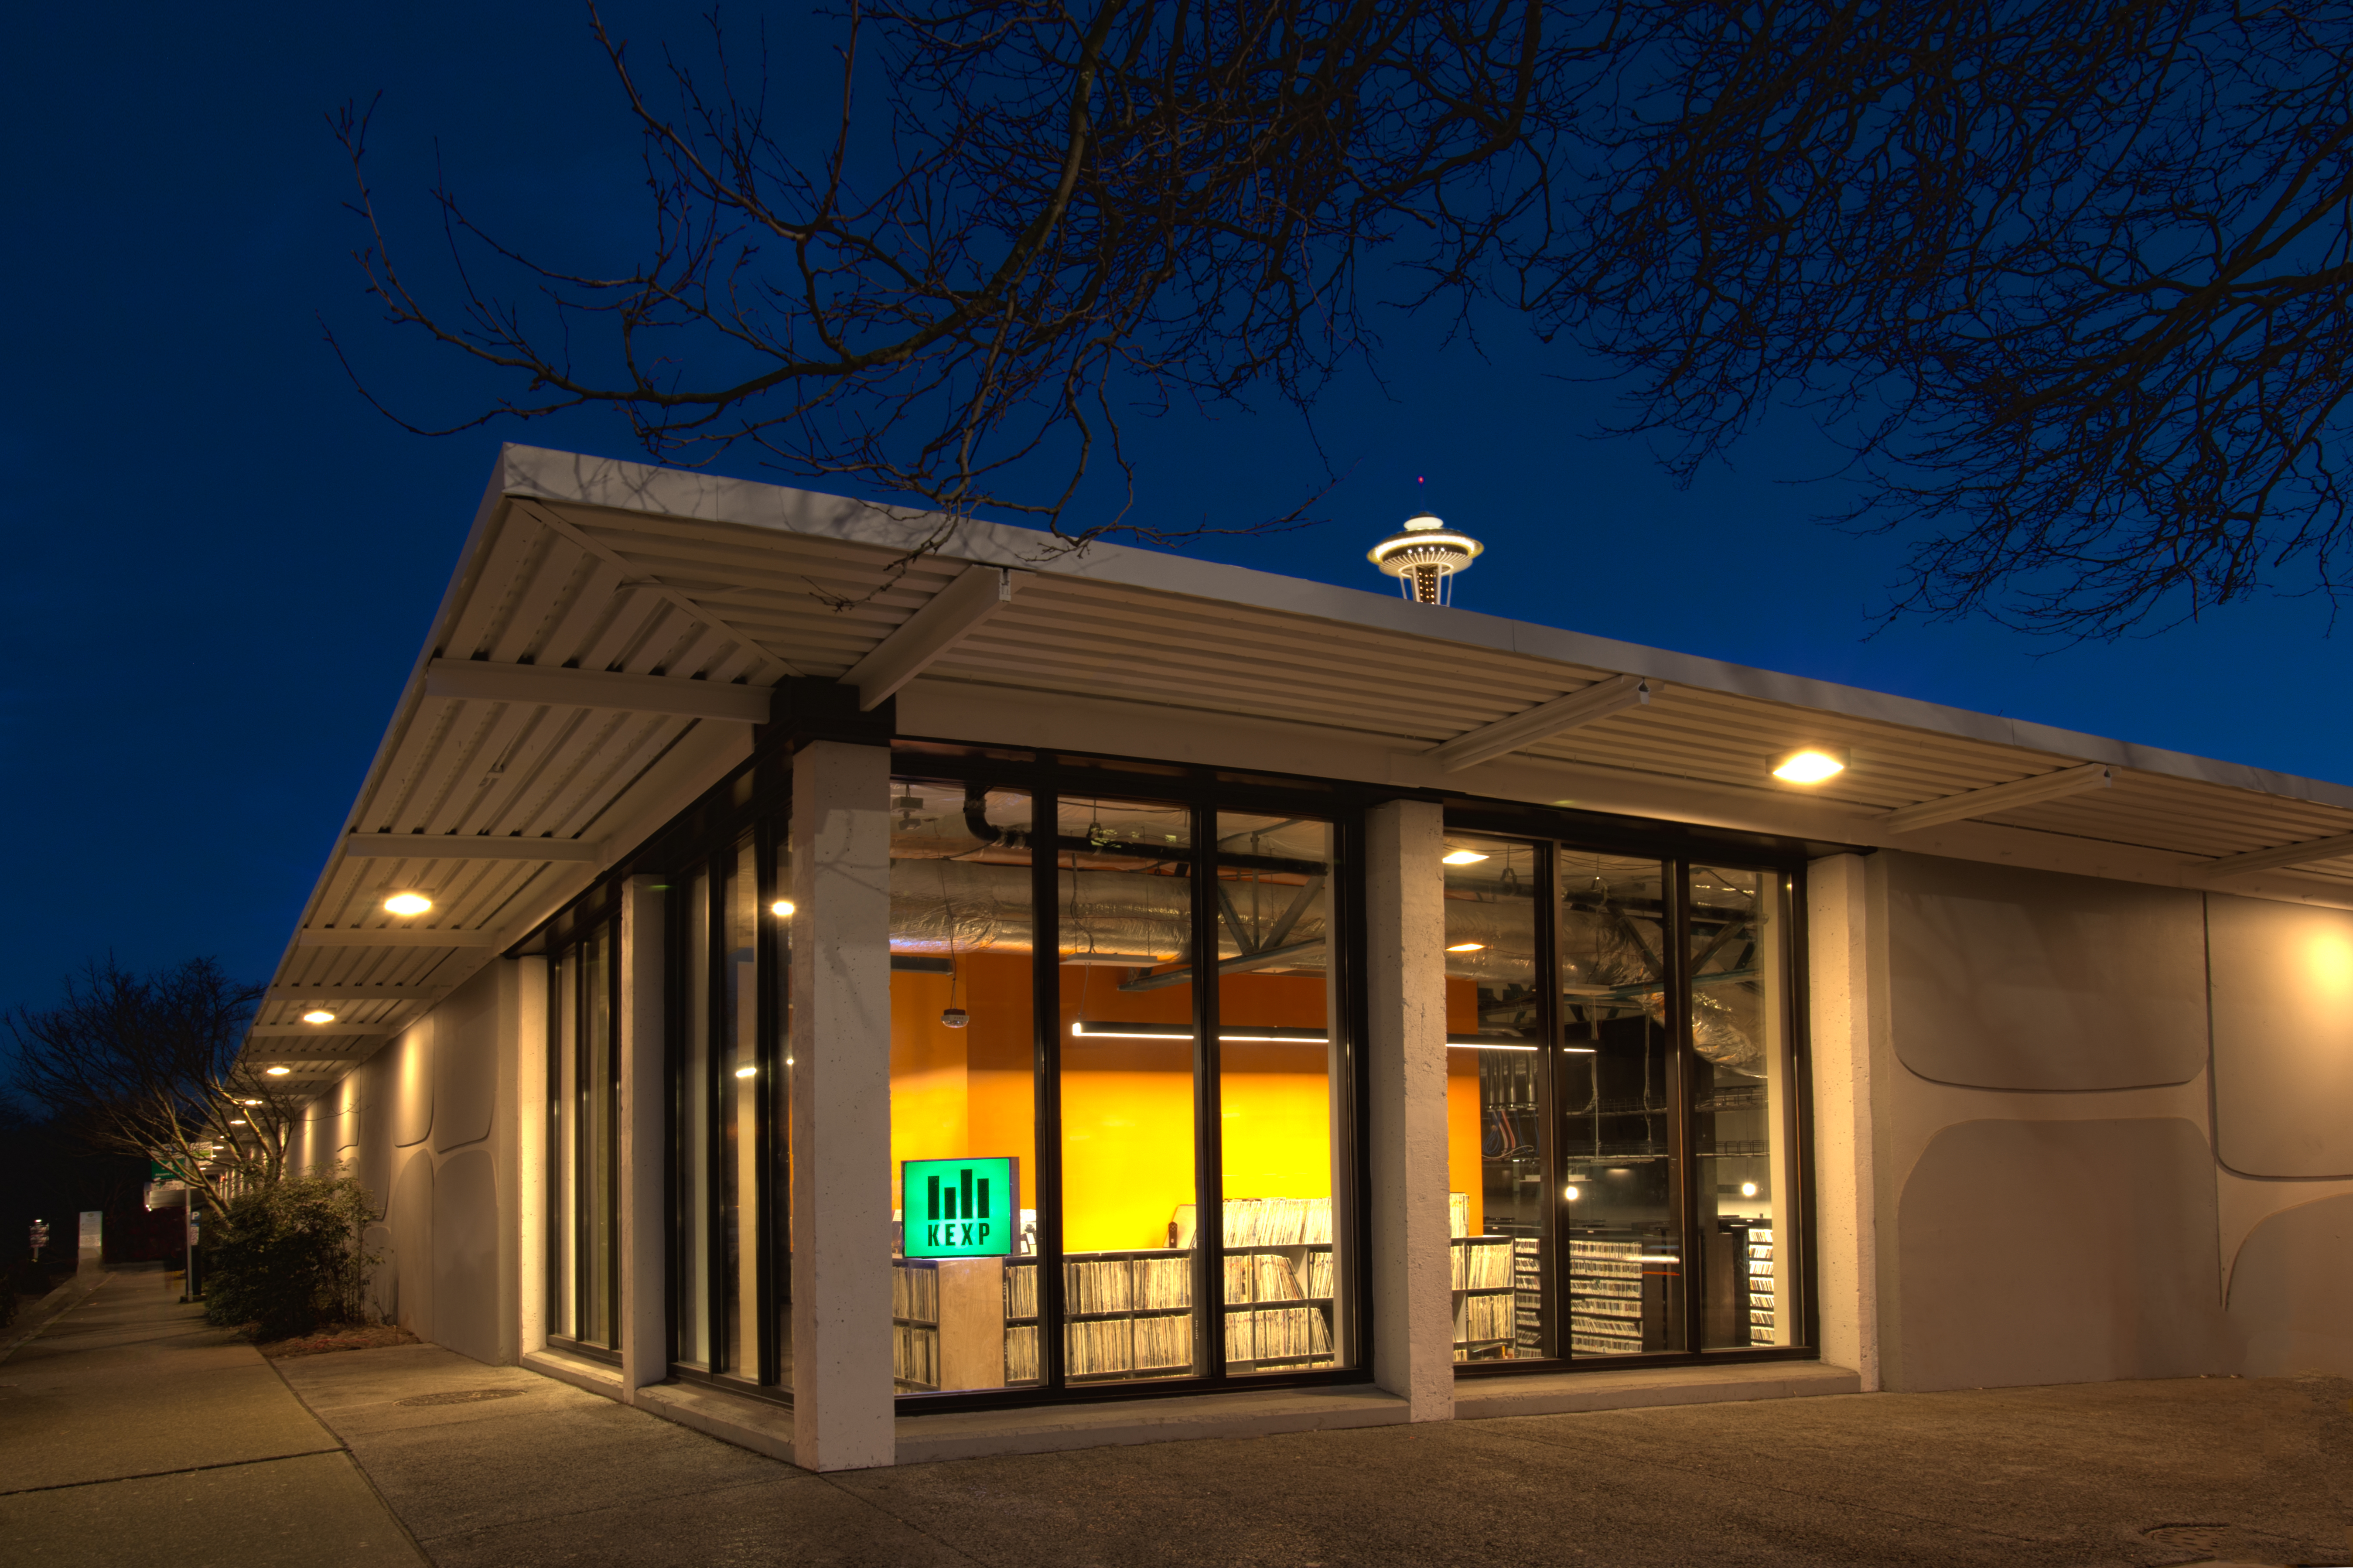 KEXP's new home